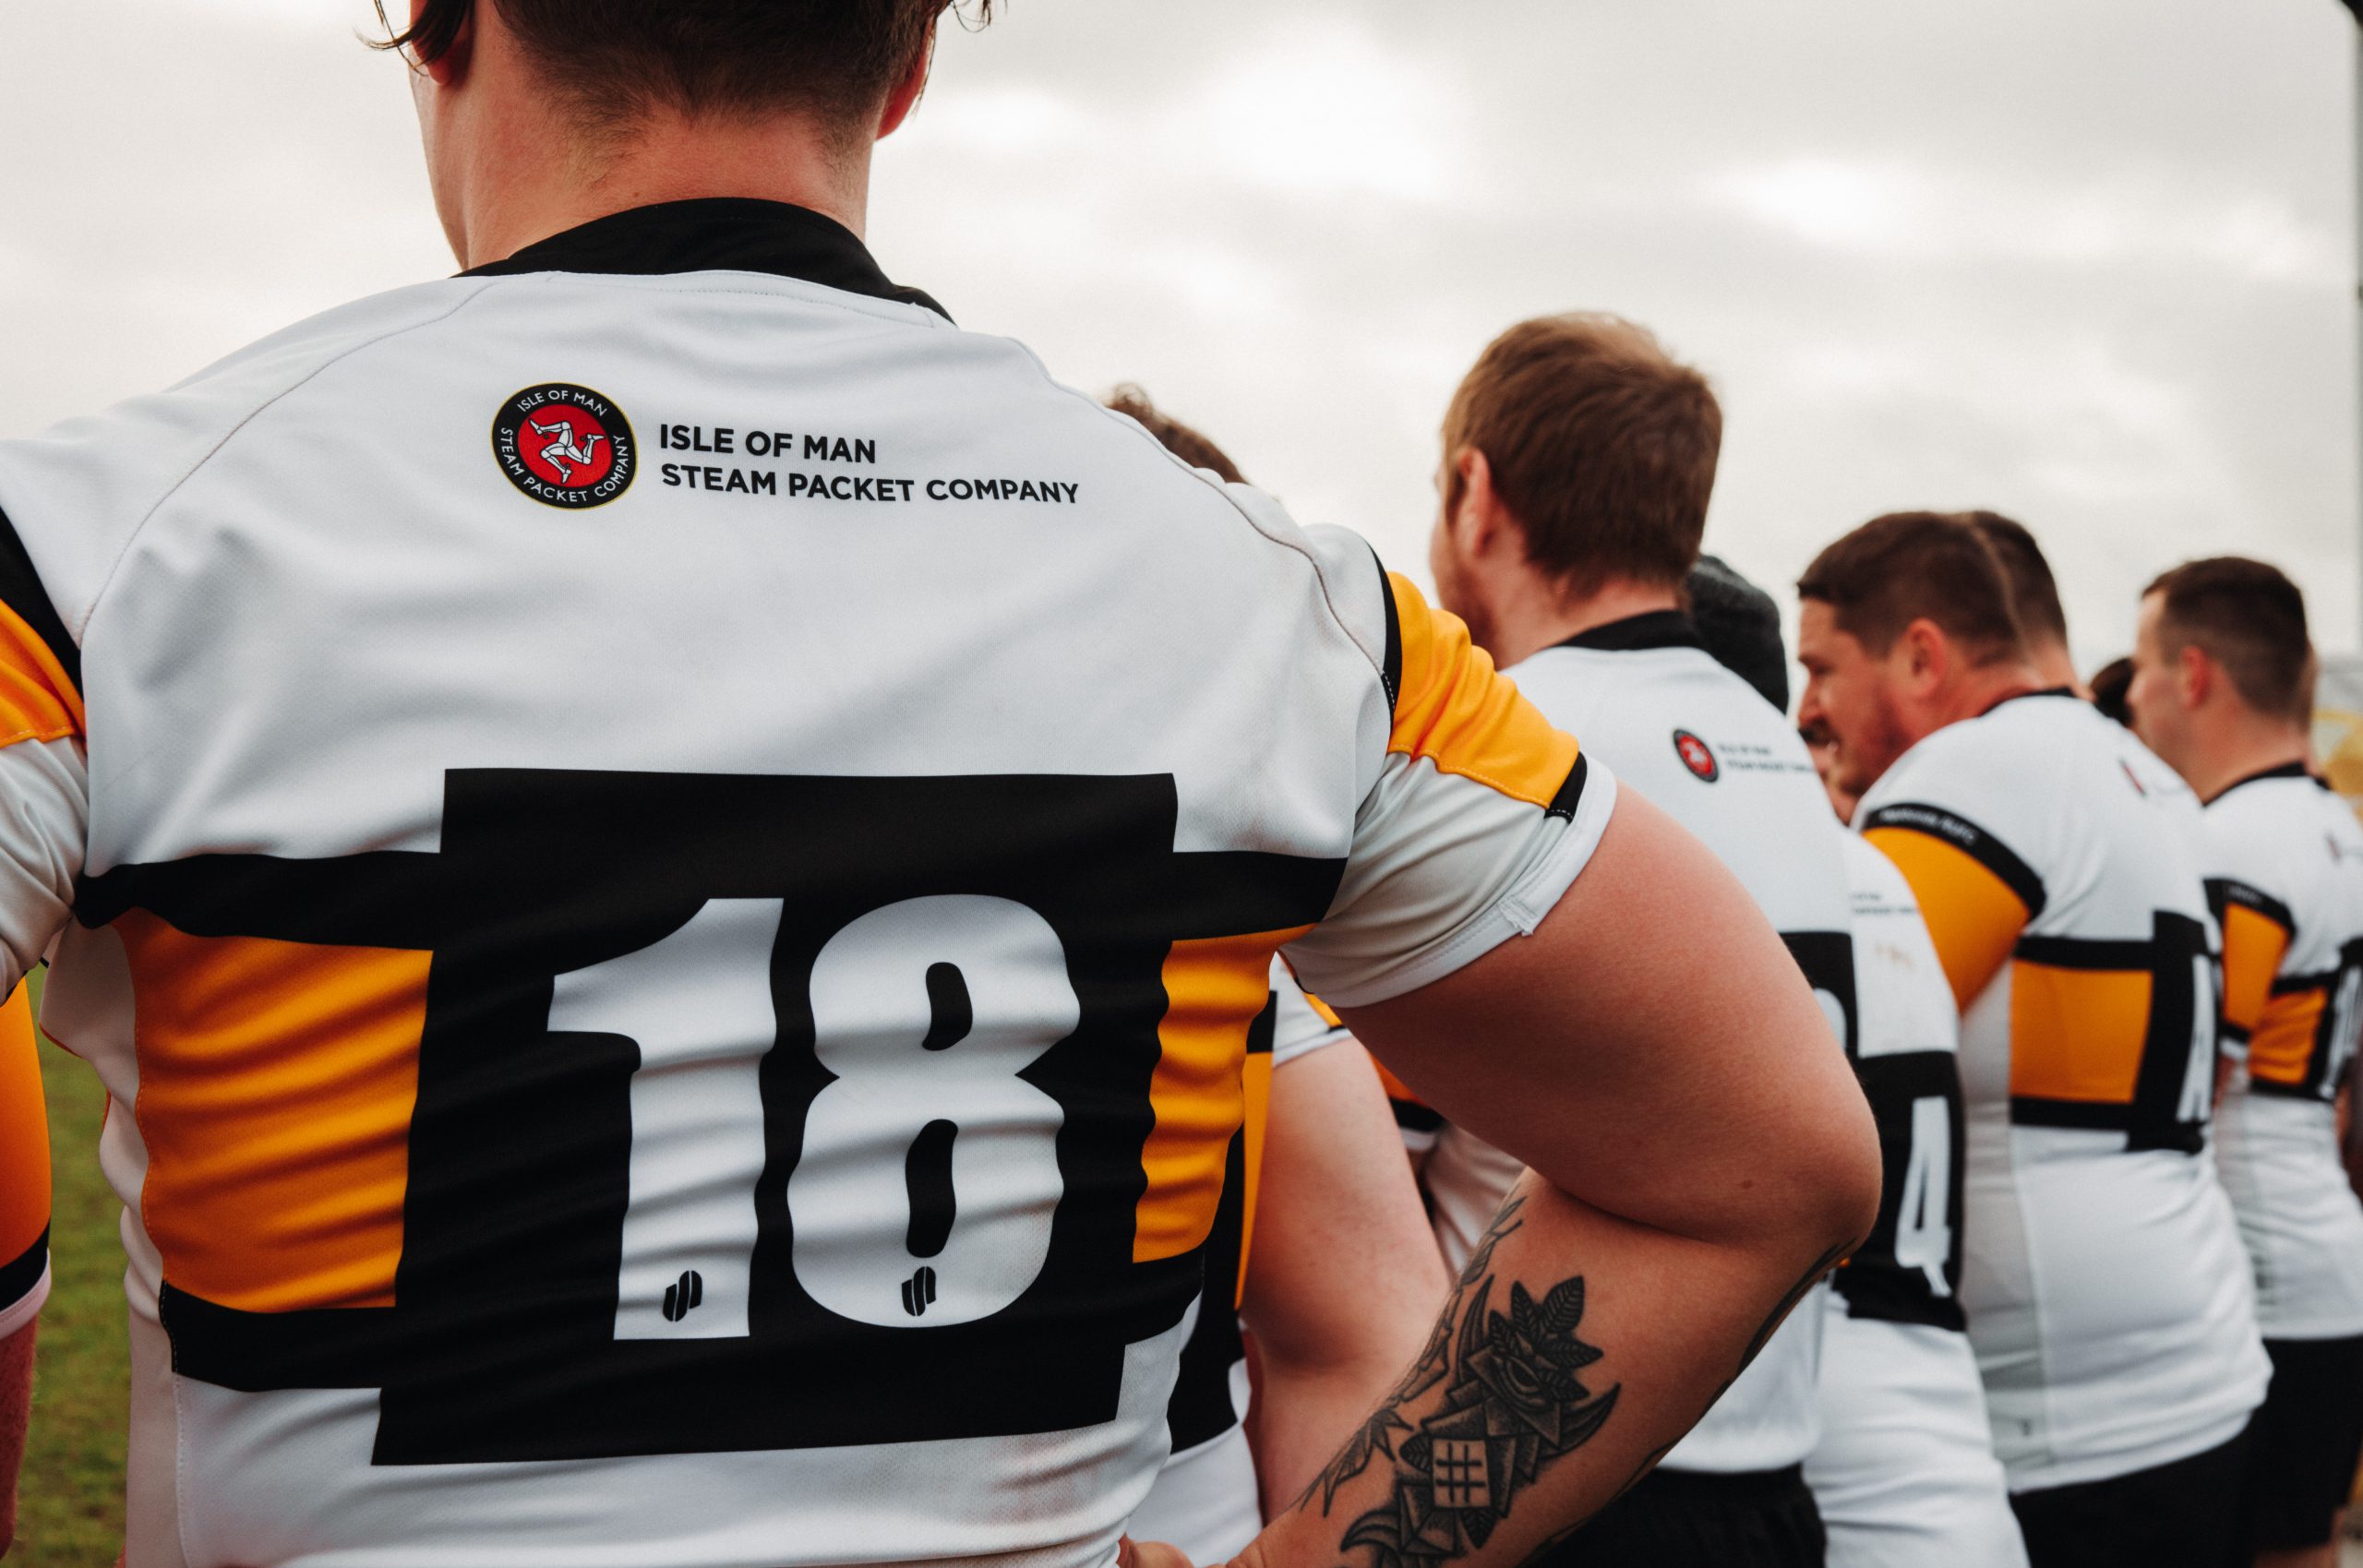 Isle of Man Steam Packet Company logos displayed on the back of the Vagabonds RUFC Senior Mens teams jerseys